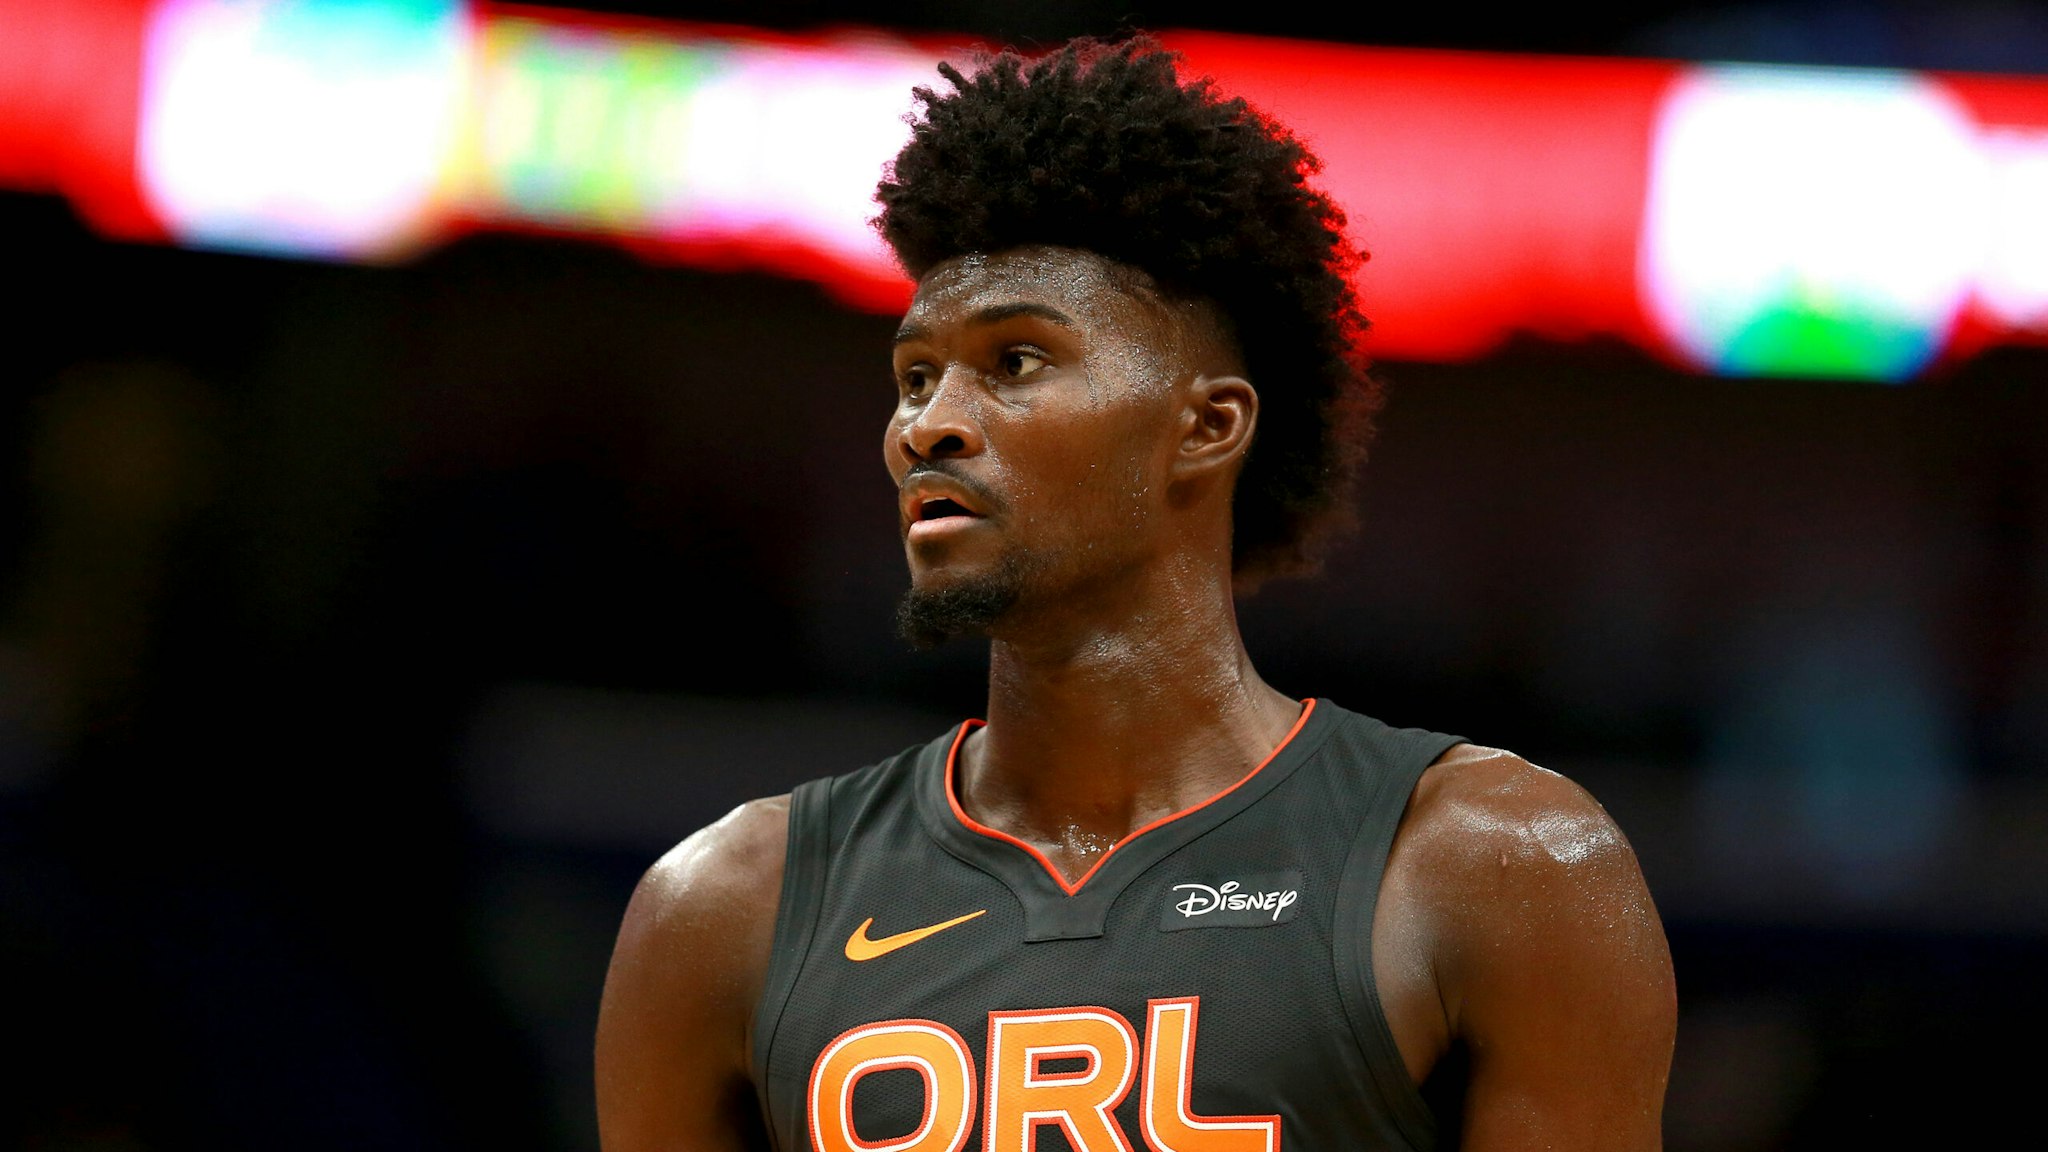 NEW ORLEANS, LOUISIANA - DECEMBER 15: Jonathan Isaac #1 of the Orlando Magic stands on the court during a NBA game against the New Orleans Pelicans at Smoothie King Center on December 15, 2019 in New Orleans, Louisiana.